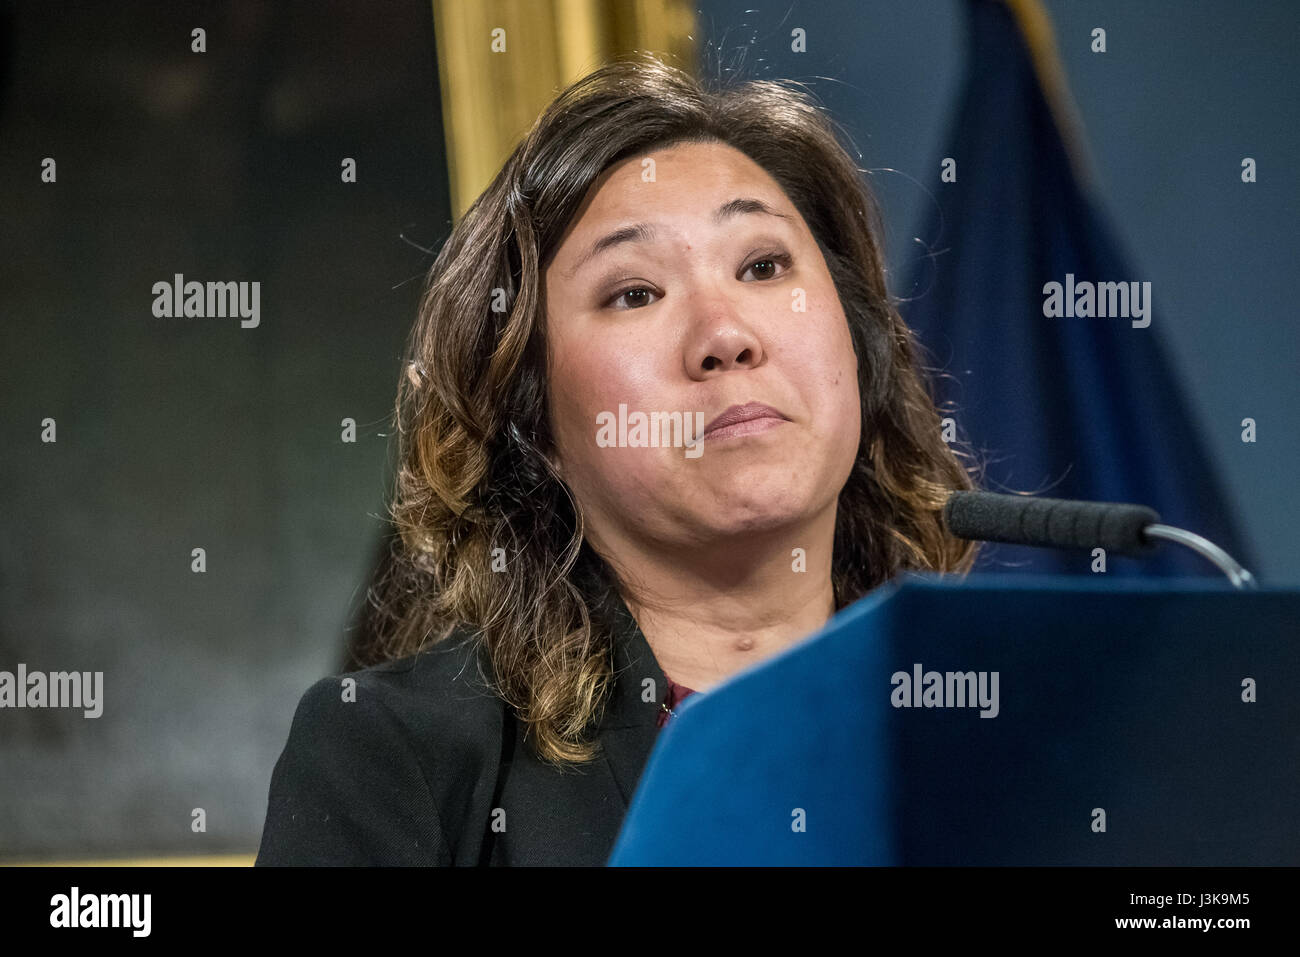 New York, United States. 05th May, 2017. U.S. Representative Grace Meng (D - NY 6th District) is seen during the press conference. New York City Mayor Bill de Blasio, joined by U.S. Congress members representing districts in New York City, held a press conference in the Blue Room at City Hall to announce a federal budget deal allowing for $68 million of reimbursements by the federal government for the City's expenses in protecting Trump Tower and the Presidential First Family. Credit: Albin Lohr-Jones/Pacific Press/Alamy Live News Stock Photo